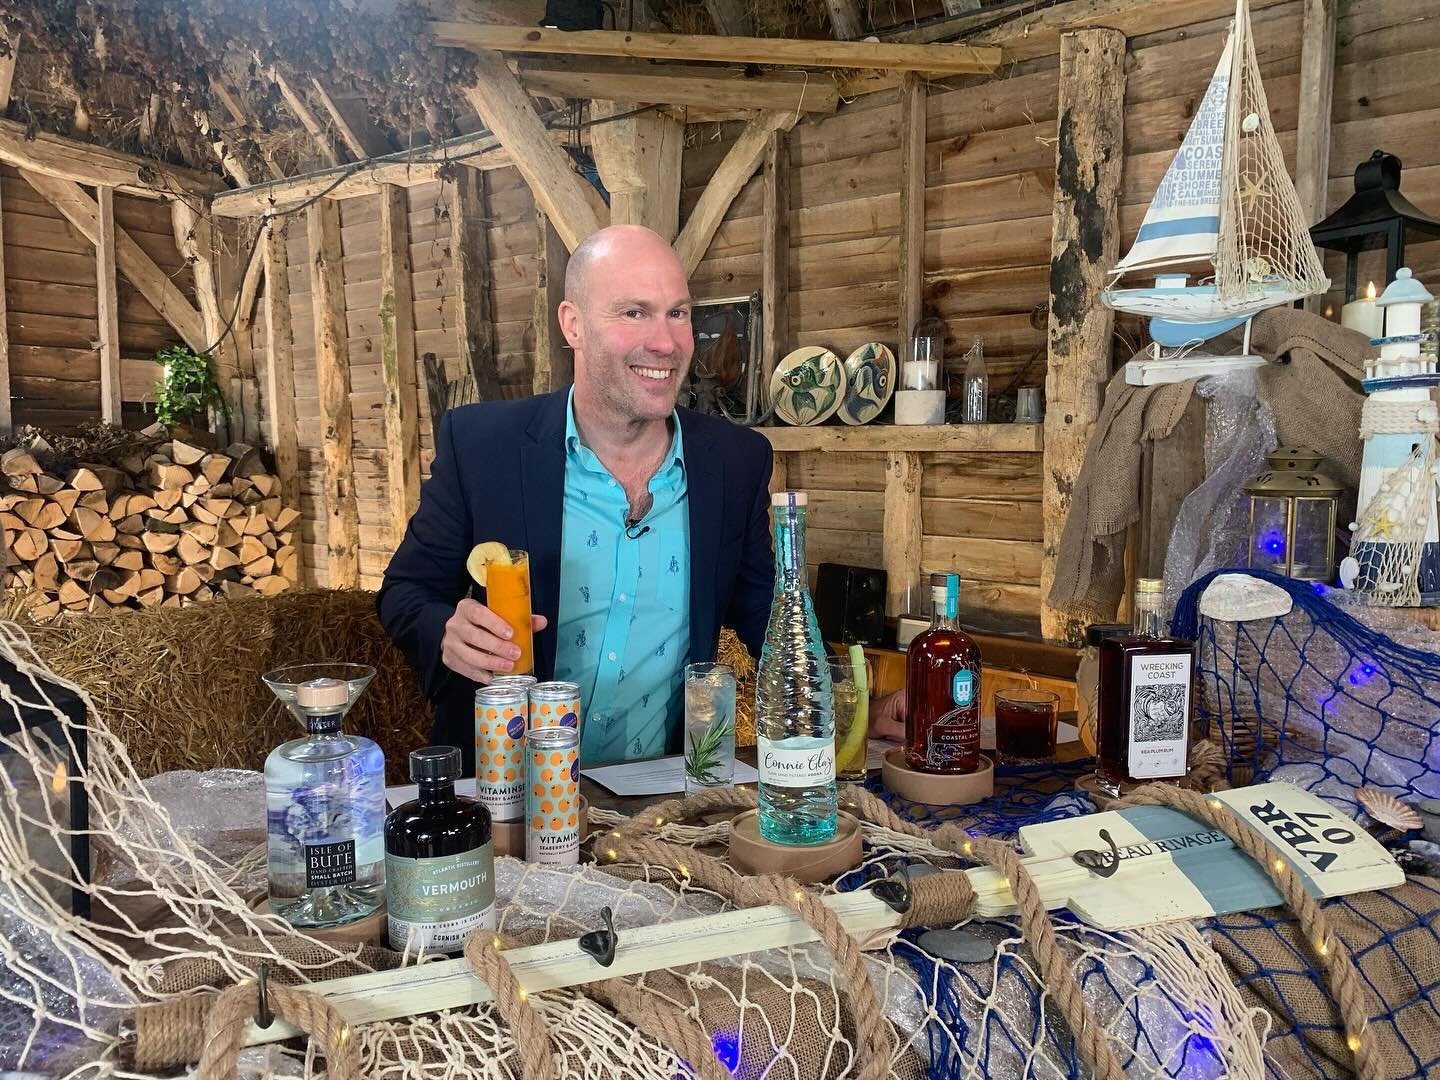 AHOY there! Lookout for our vitaminSEA juice on @itvloveyourweekend tomorrow! 👀👀👀🧡🧡🧡

The drinks expert, friend of Cornish Seaberry and genuinely awesome guy that is @tvsandyclarke has put together a &lsquo;spirit of the seas&rsquo; drinks feat